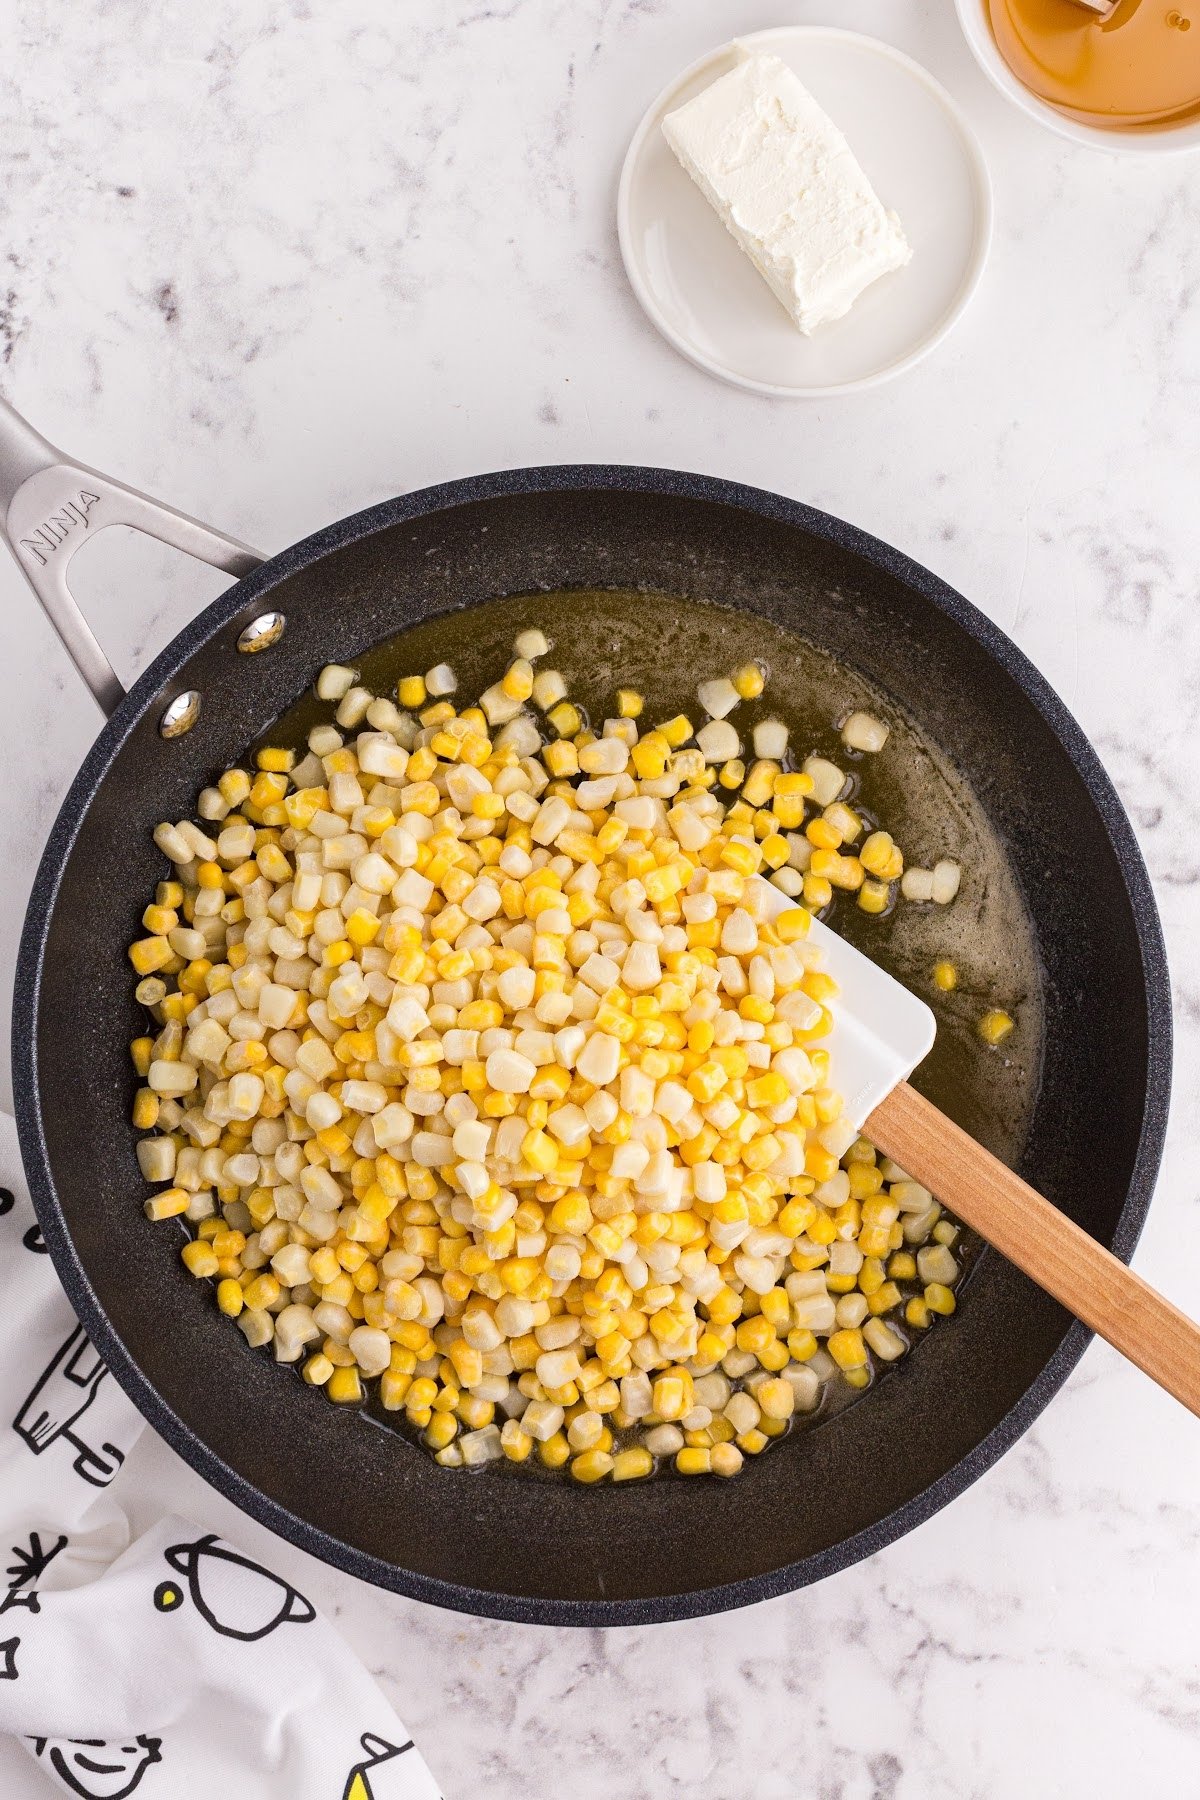 Corn added to buttered skillet.